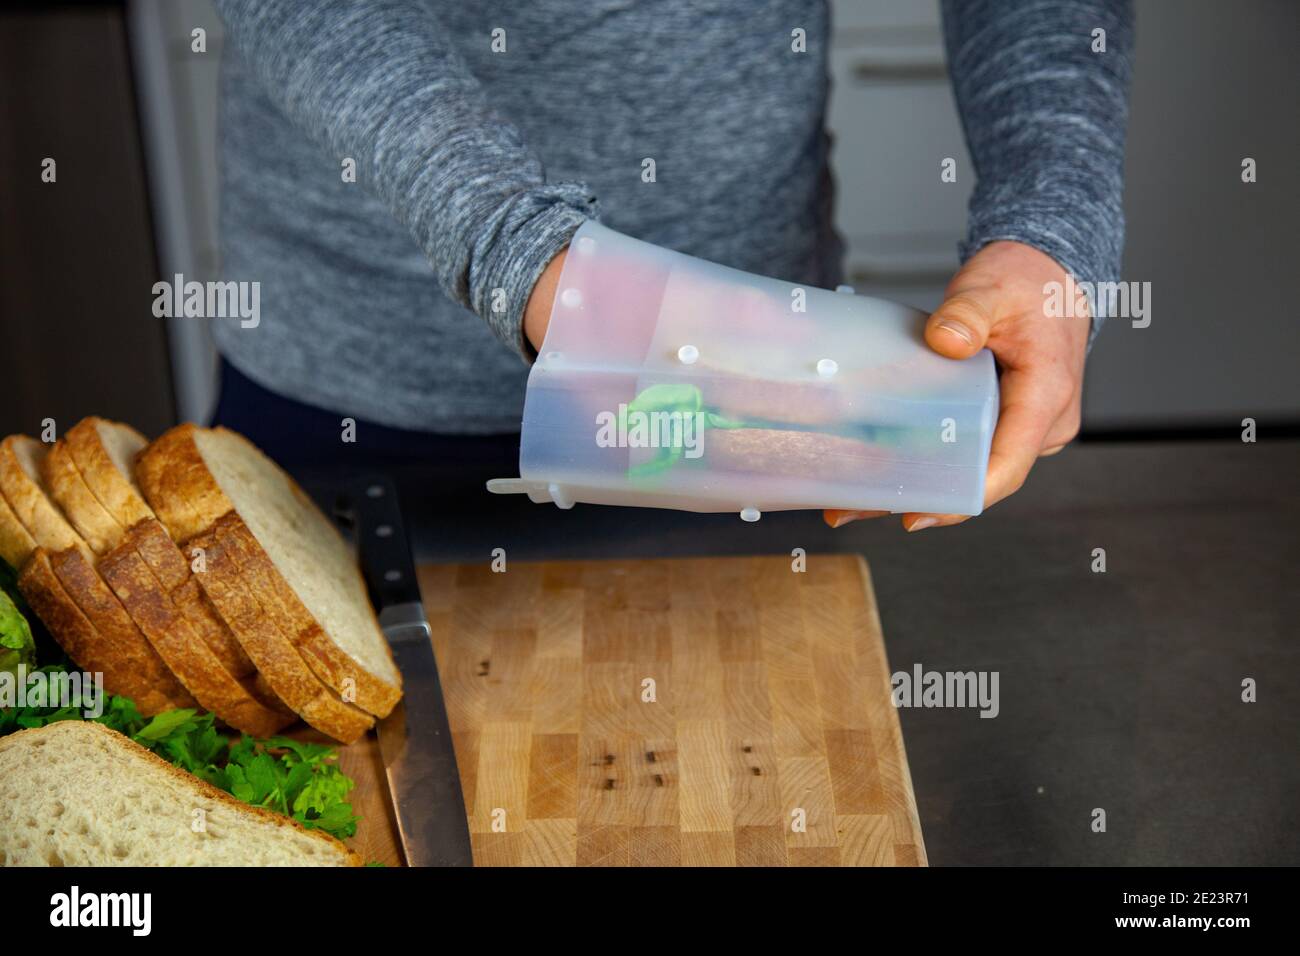 A women prepares lunch and puts a sandwich into a food-grade silicone bag as part of a zero-waste lifestyle to replace plastic bags Stock Photo